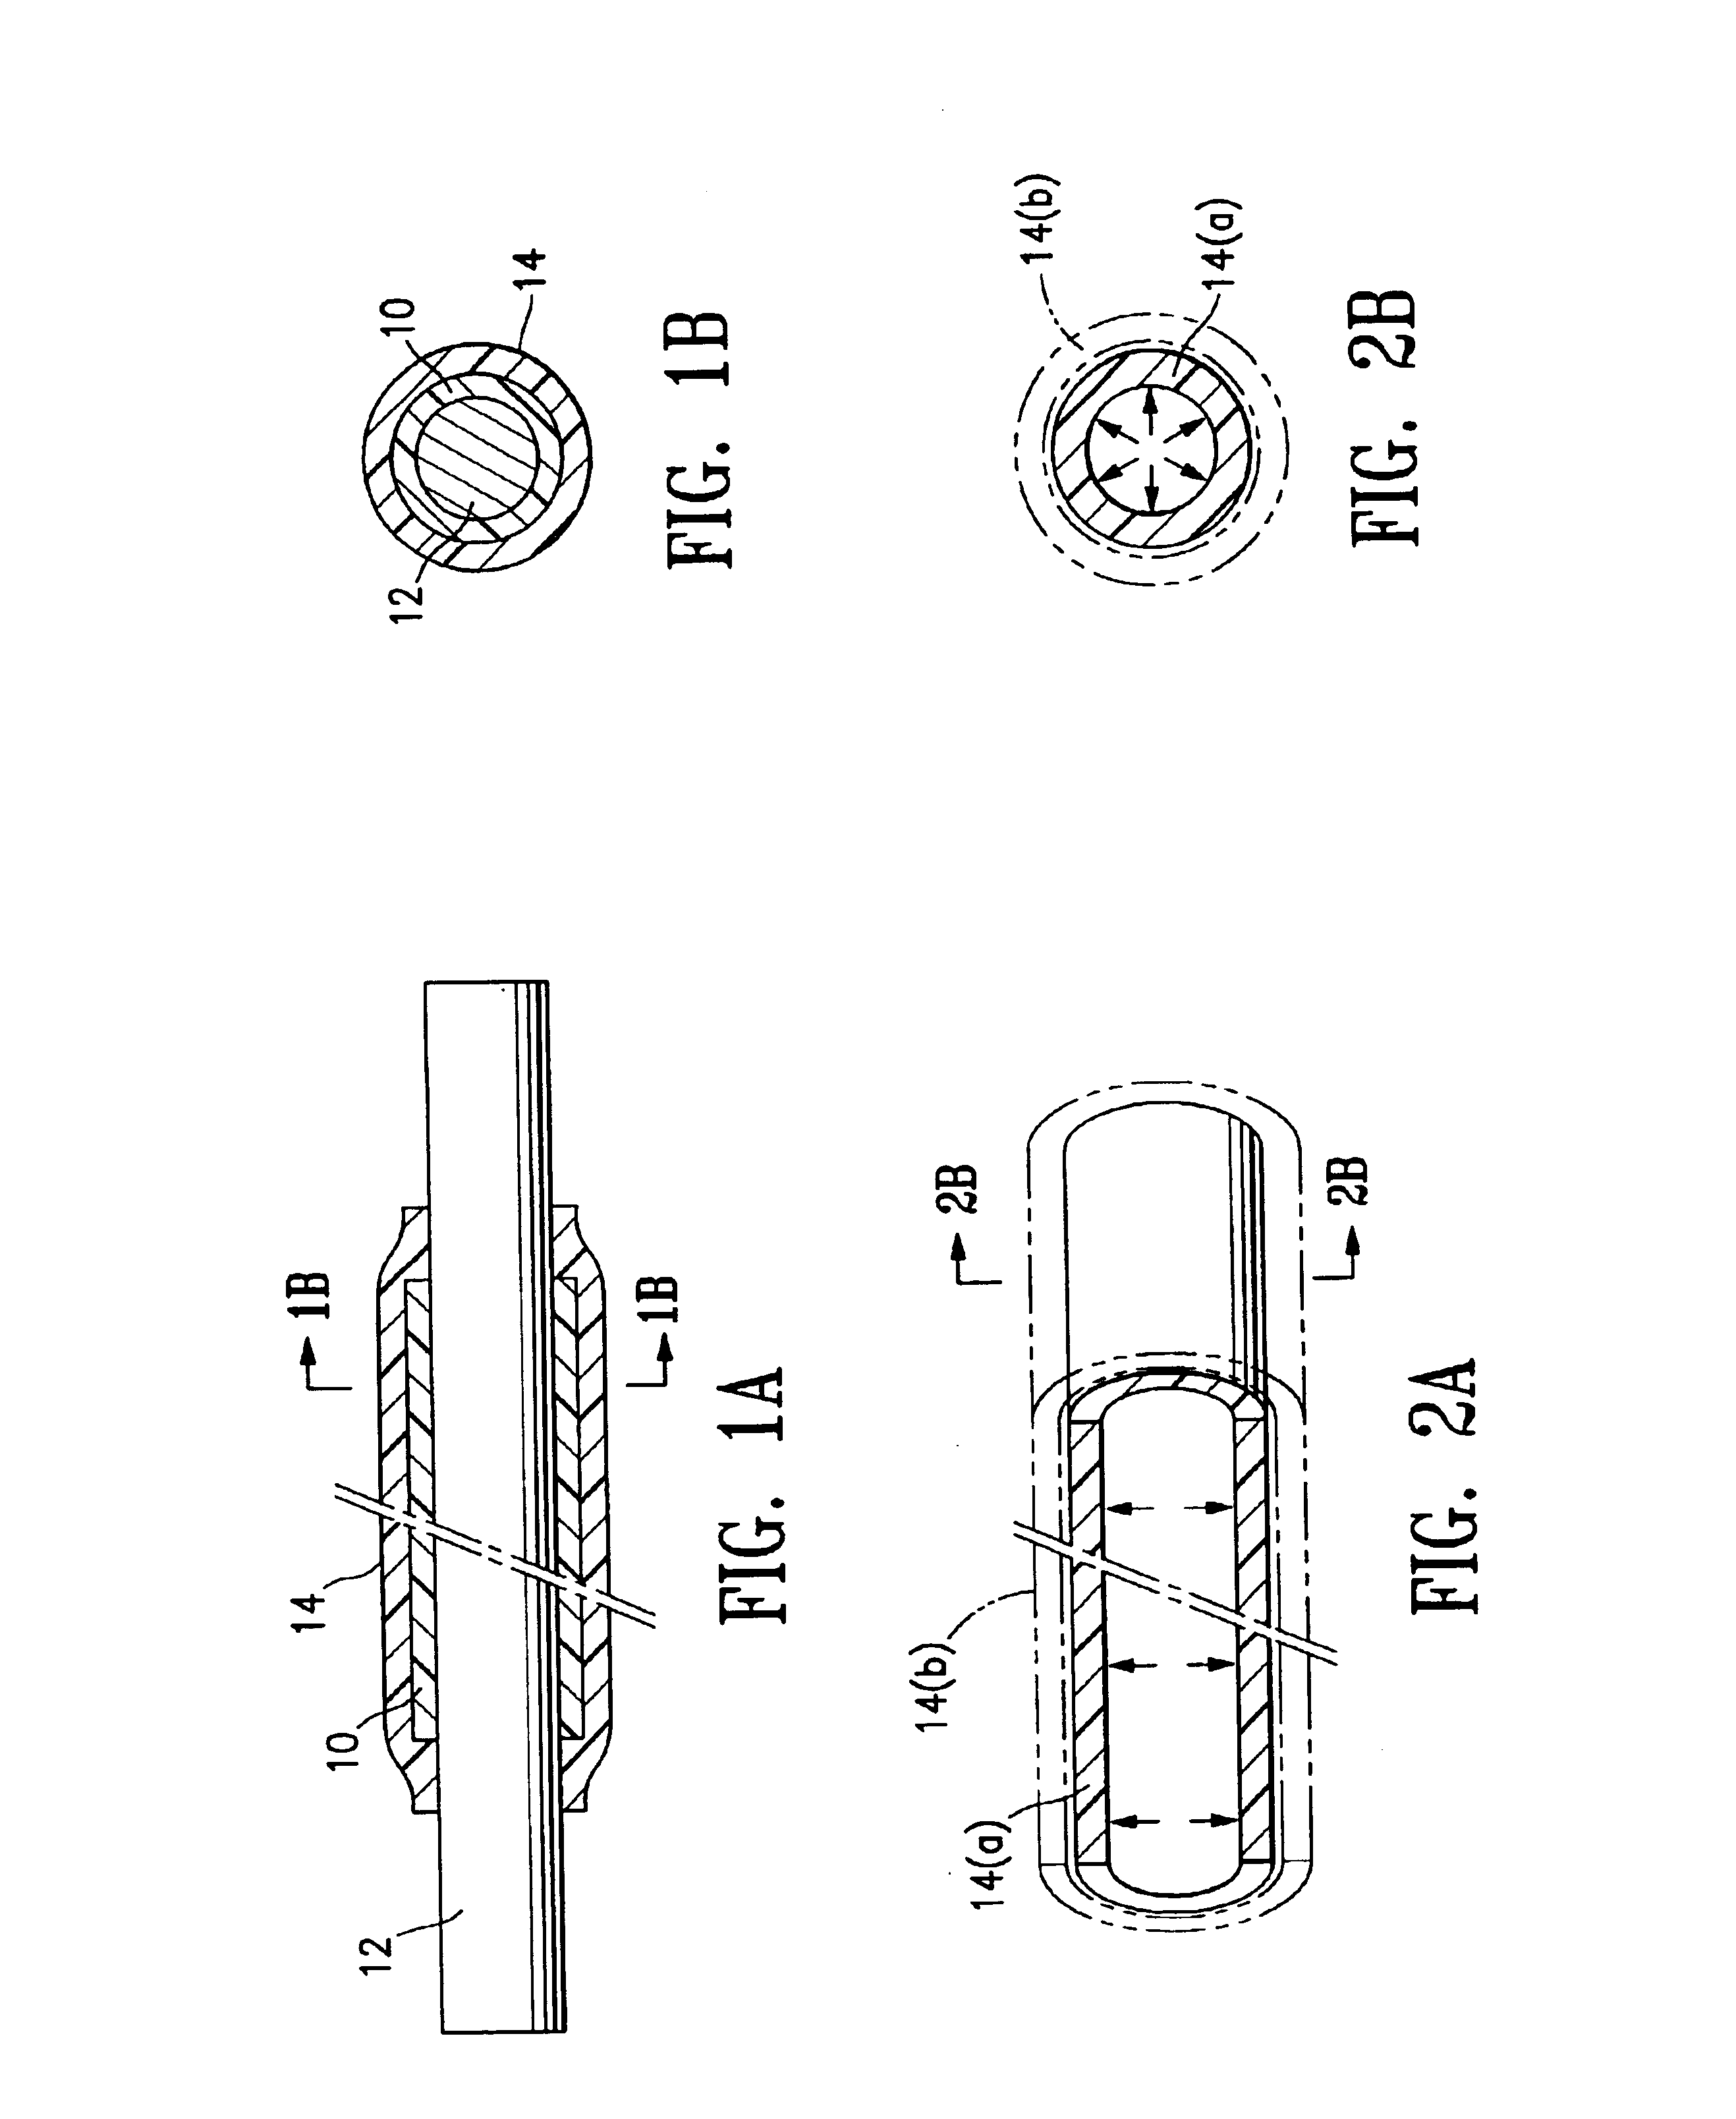 Method of making an expandable medical device formed of a compacted porous polymeric material